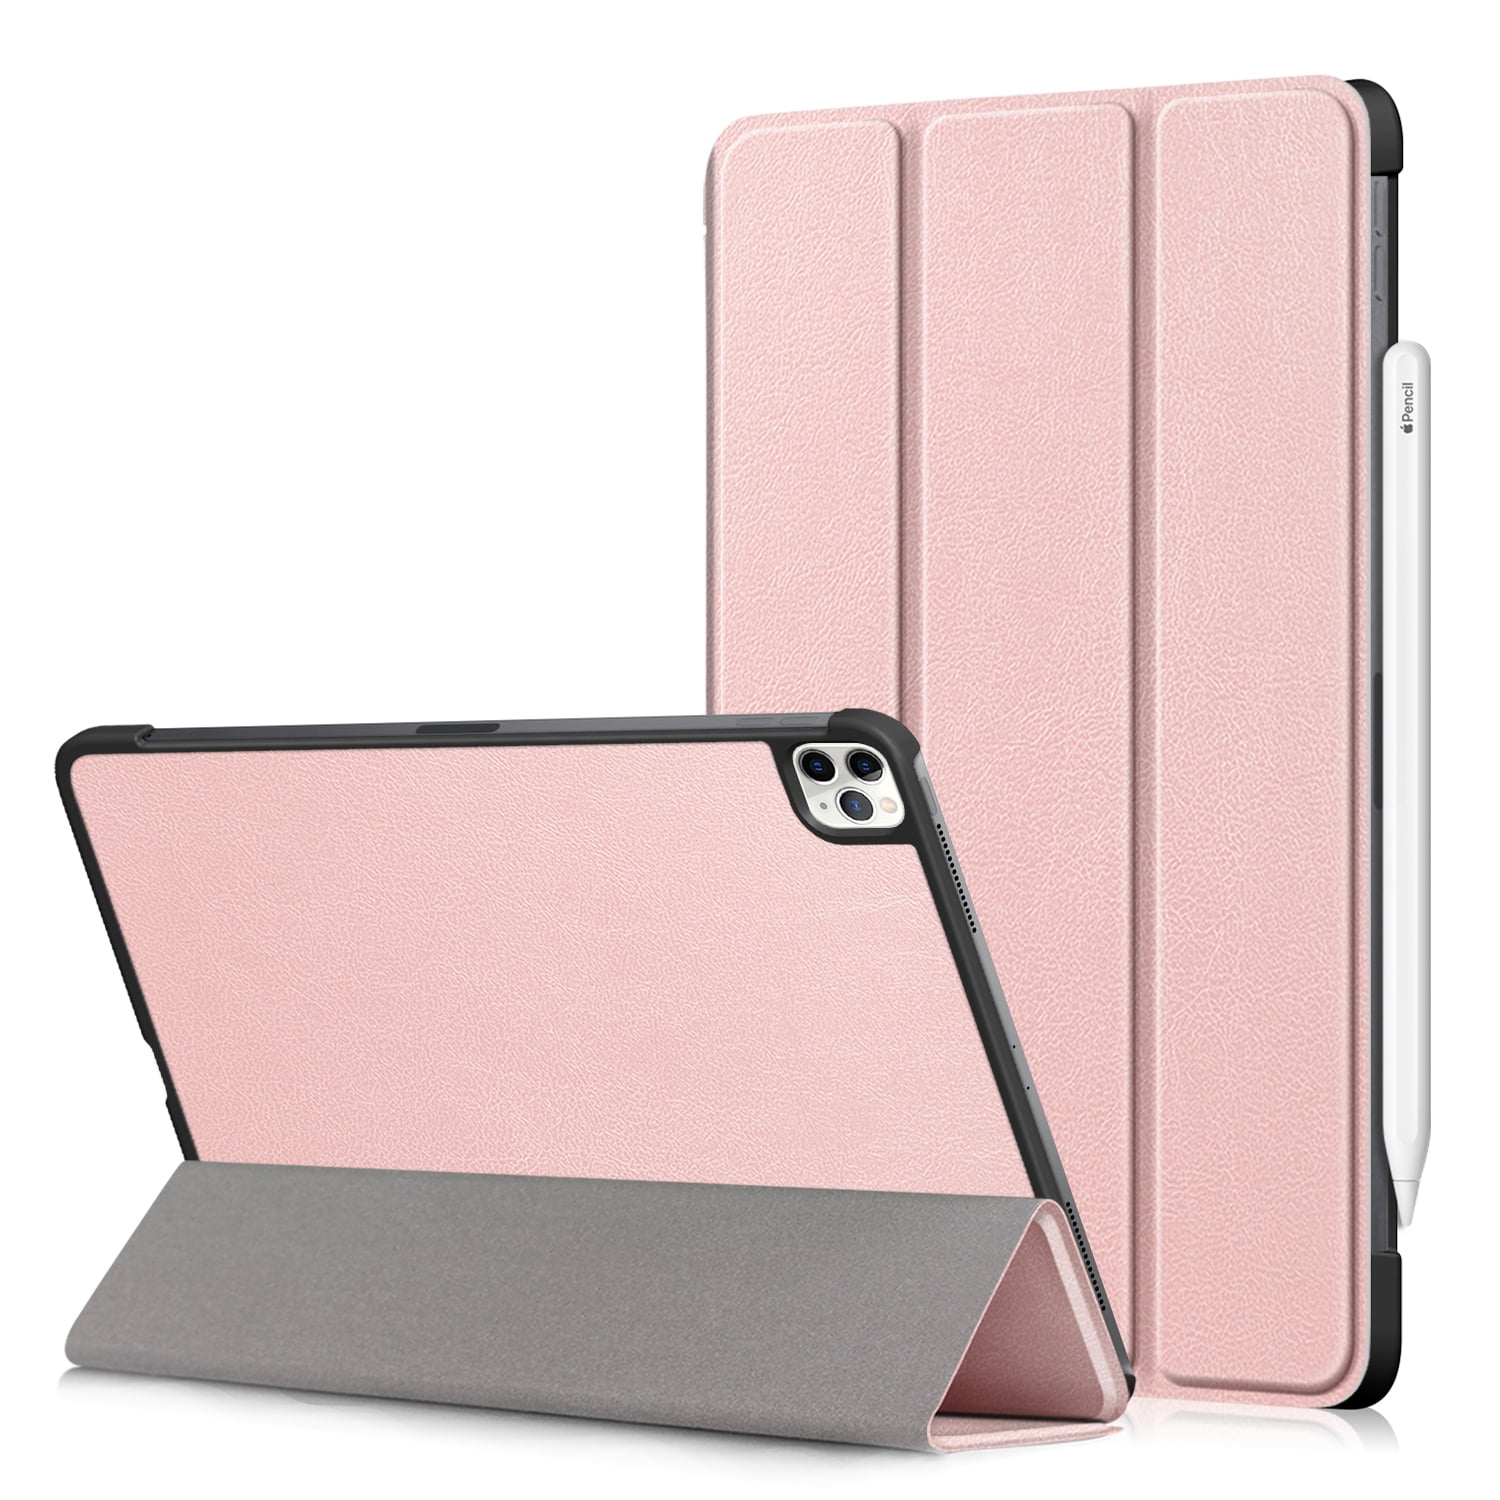 Allytech Ipad Pro 11 2020 Case 2nd Generation Slim Lightweight Support Apple Pencil Charging Auto Sleep Wake Trifold Stand Protective Smart Cover Case For Apple Ipad Pro 11 Inch 2020 Rosegold Walmart Com Walmart Com